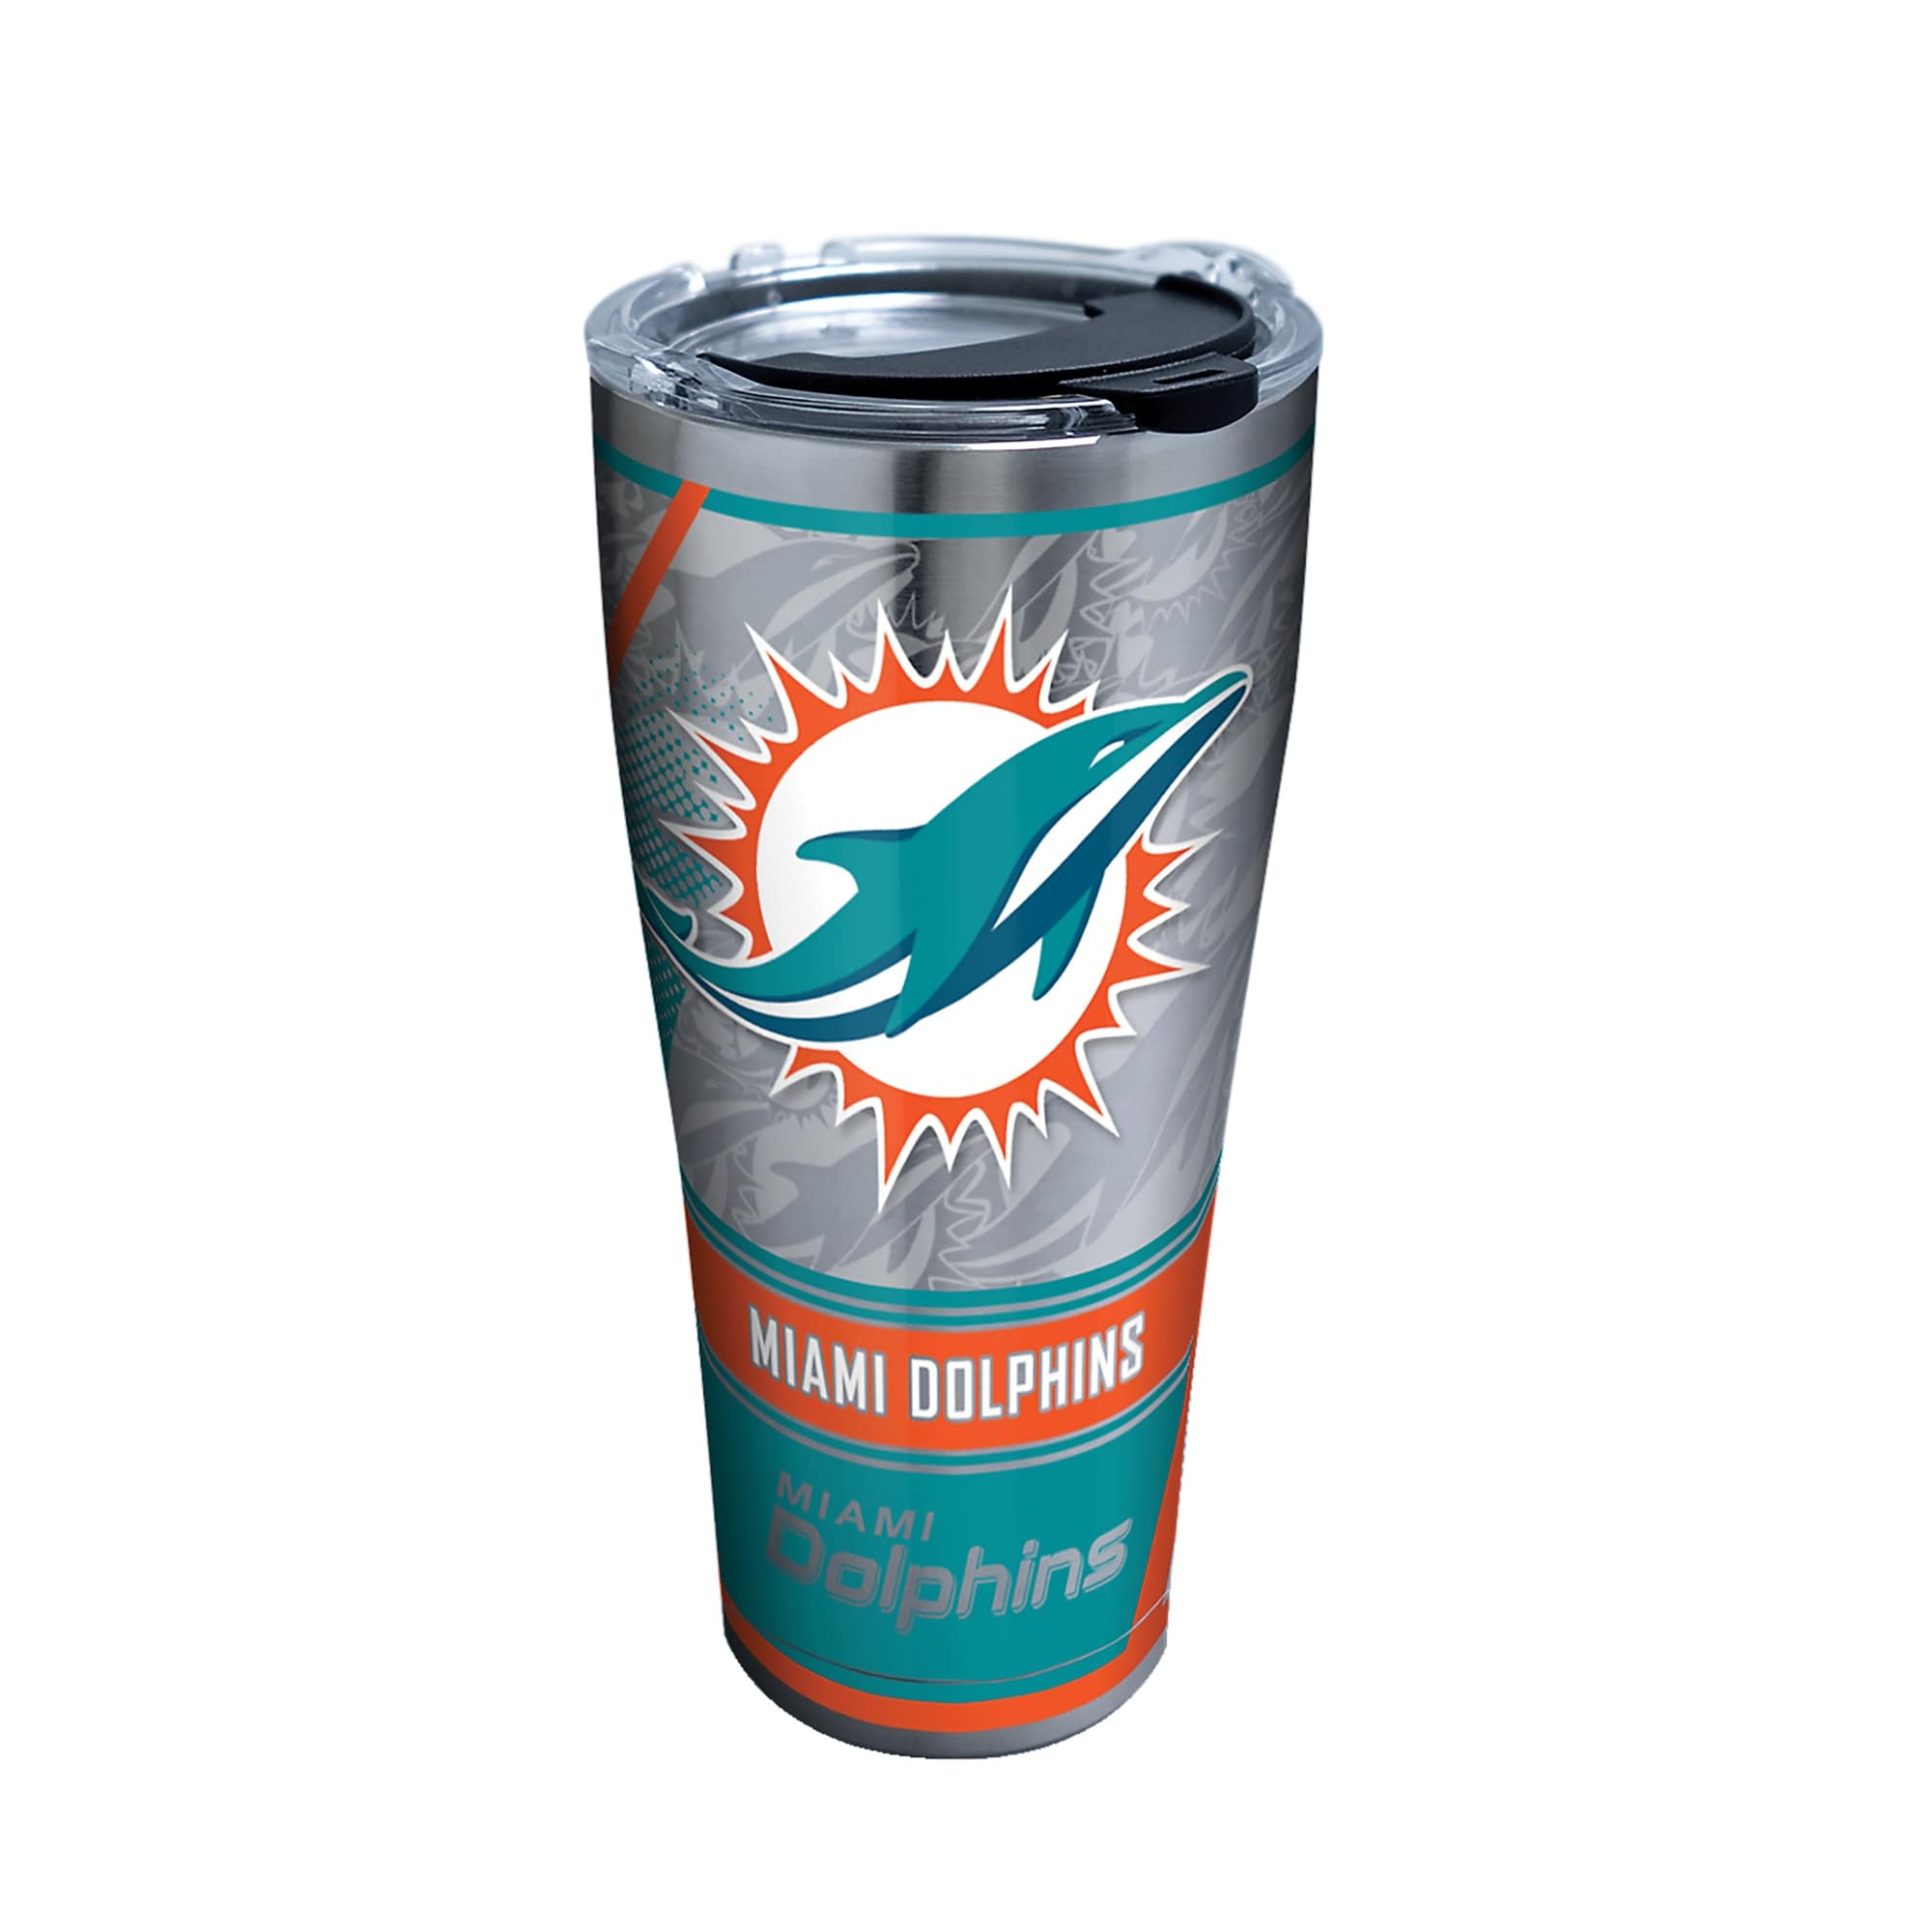 https://ak1.ostkcdn.com/images/products/is/images/direct/5614e89f713ee82cd824c3443efe017bb468c8a4/NFL-Miami-Dolphins-Edge-30-oz-Stainless-Steel-Tumbler-with-lid.jpg